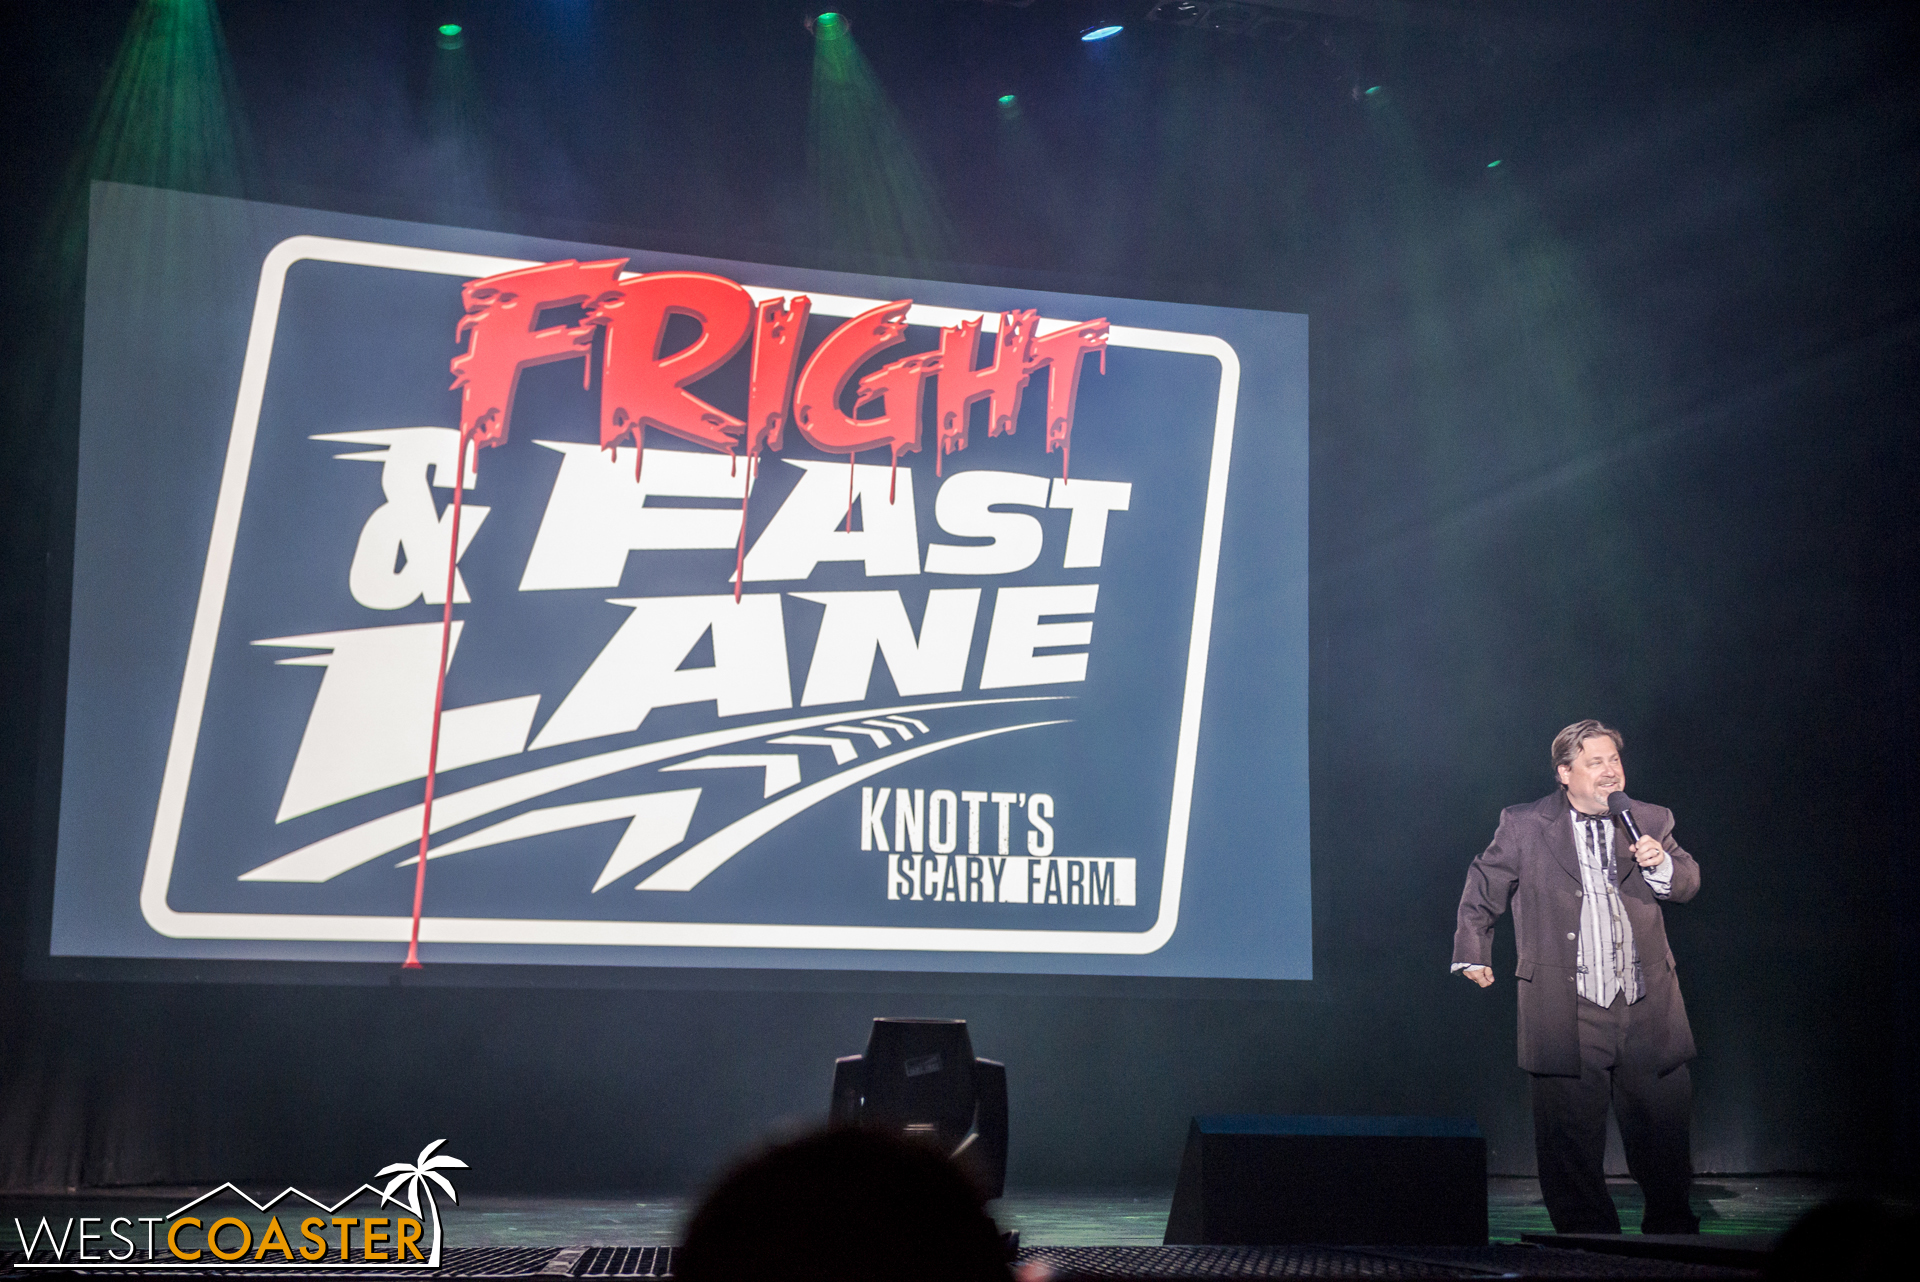  In past years, Fright Lane only provided front of line to the mazes and access to the Skeleton Key Rooms.&nbsp; This year, it lets you skip the line at rides too! 